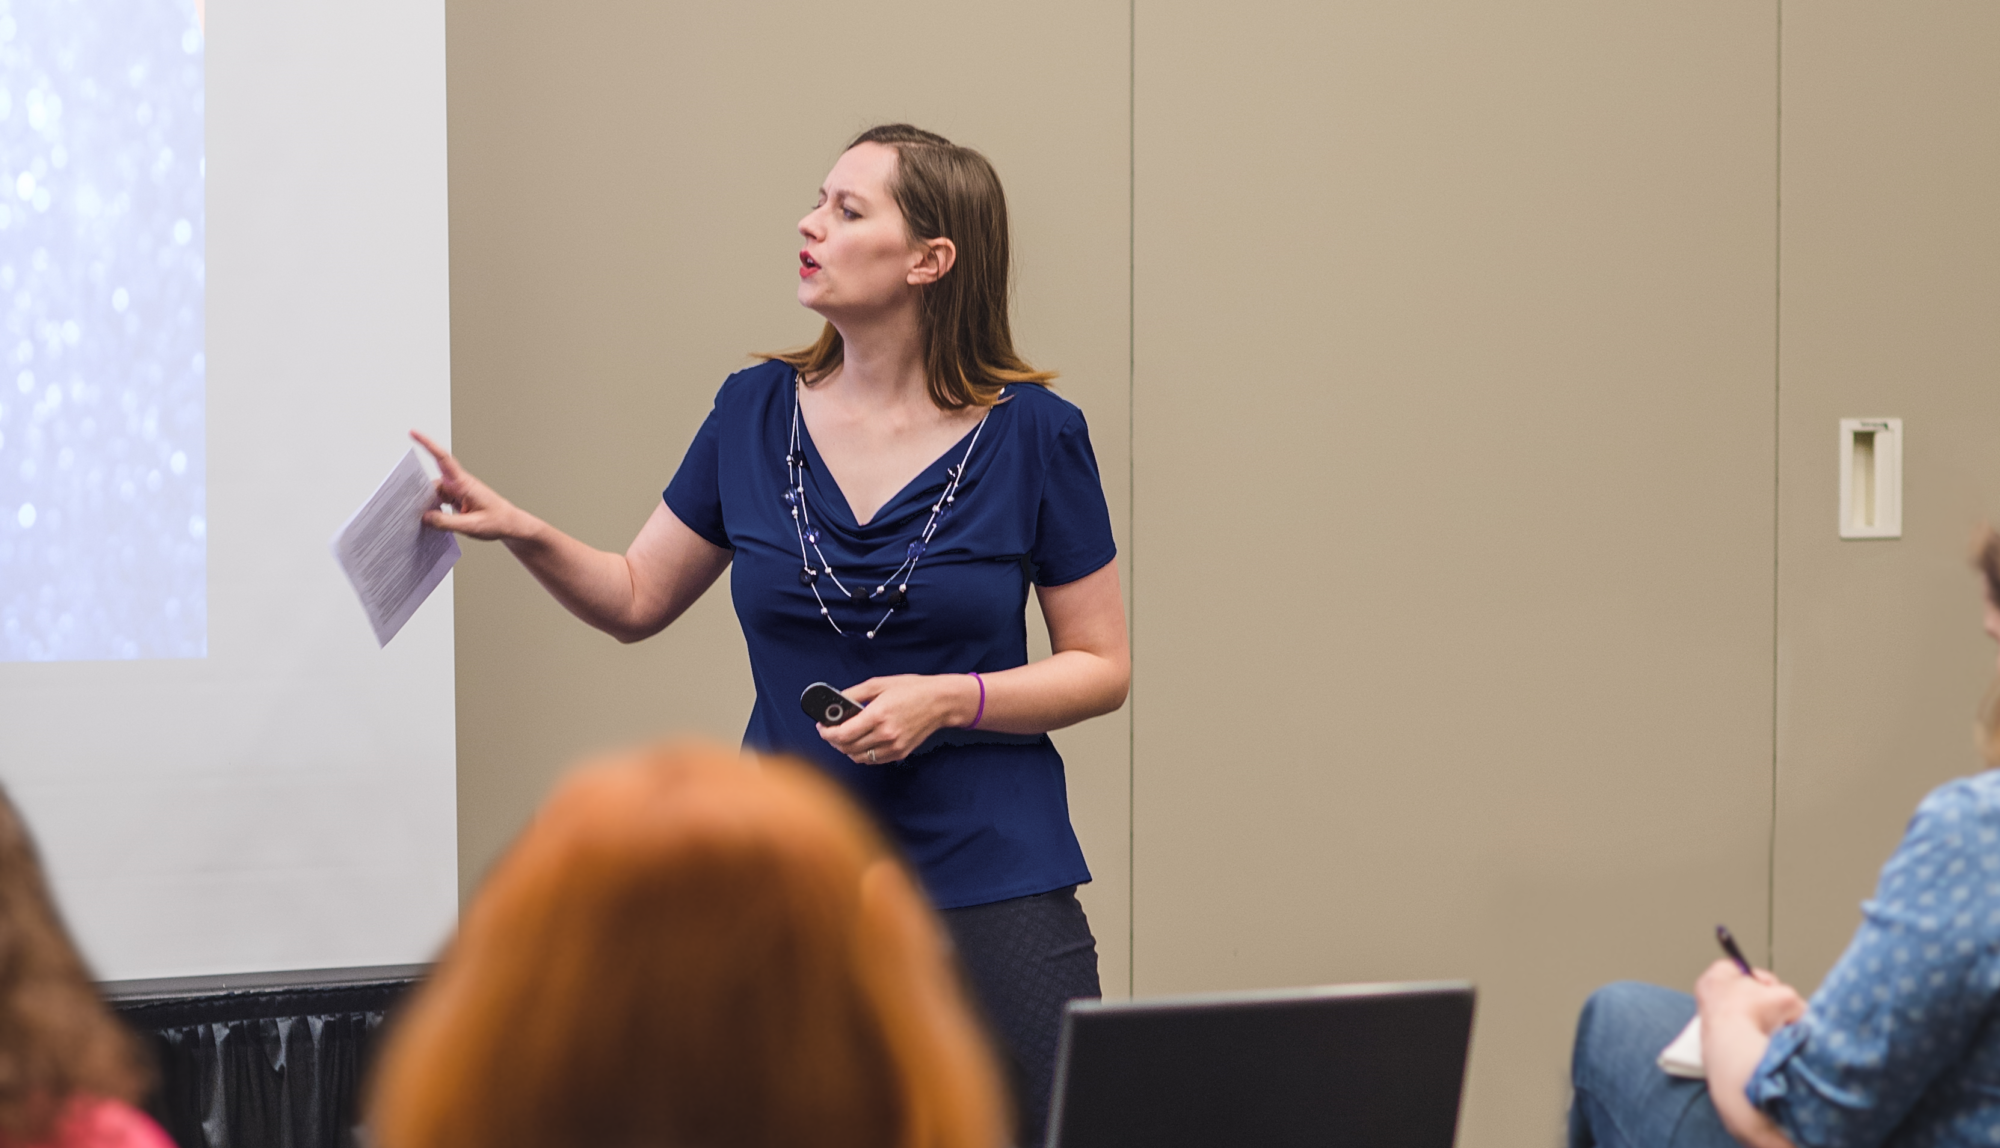 Jordan McCollum, a white woman in her thirties with long brown hair, wearing a navy shirt, teaching in a conference classroom. Photo by Erin Summerill